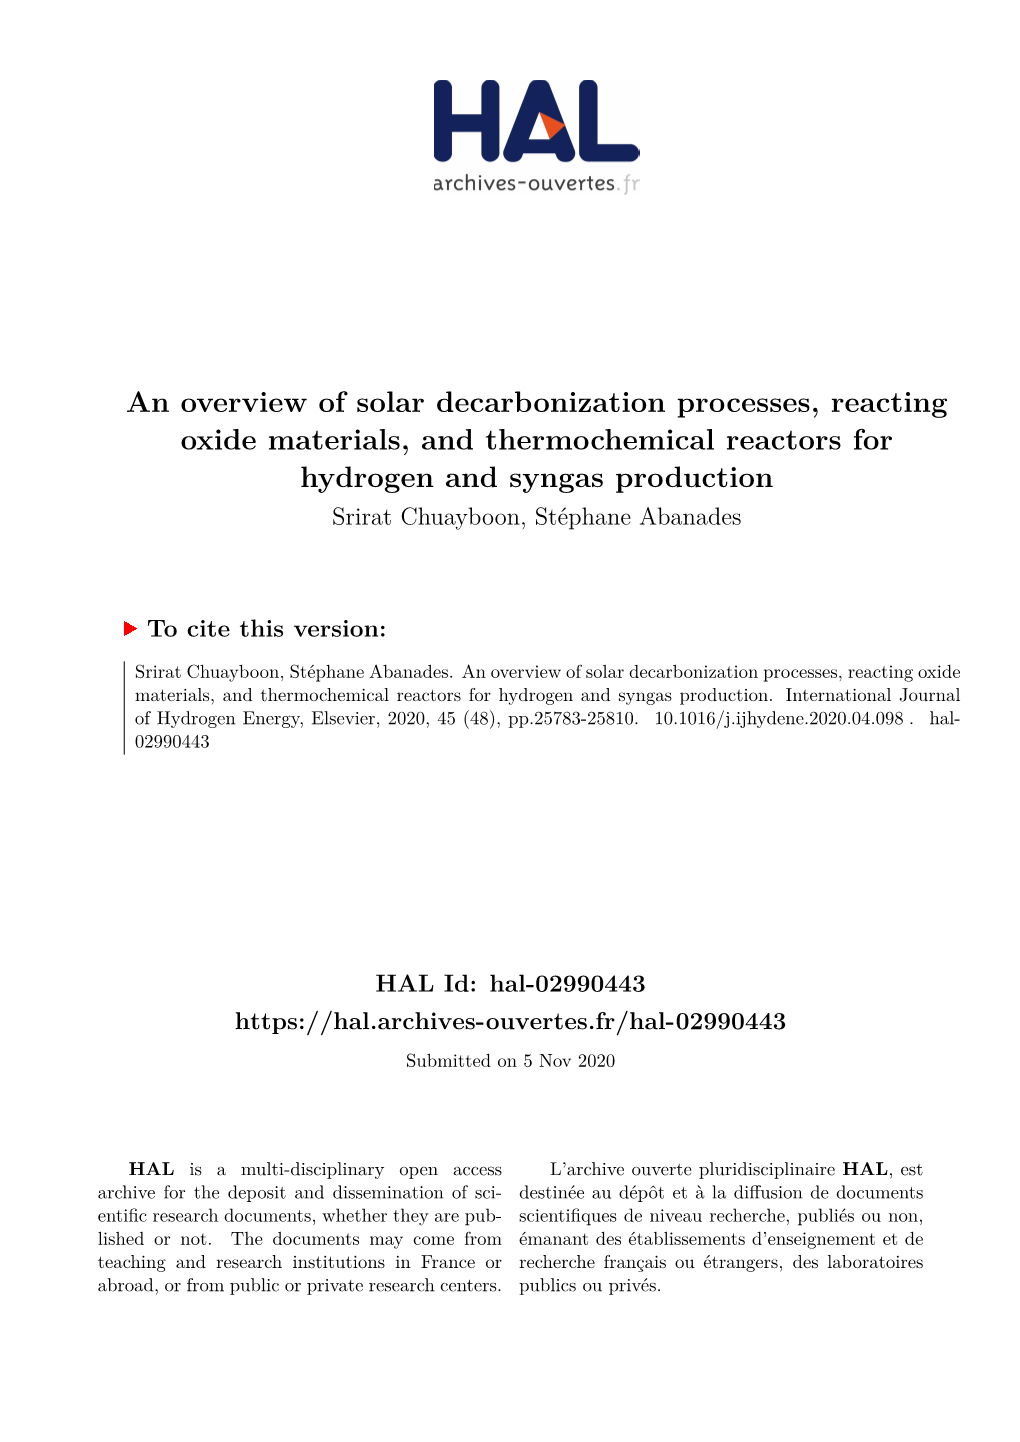 An Overview of Solar Decarbonization Processes, Reacting Oxide Materials